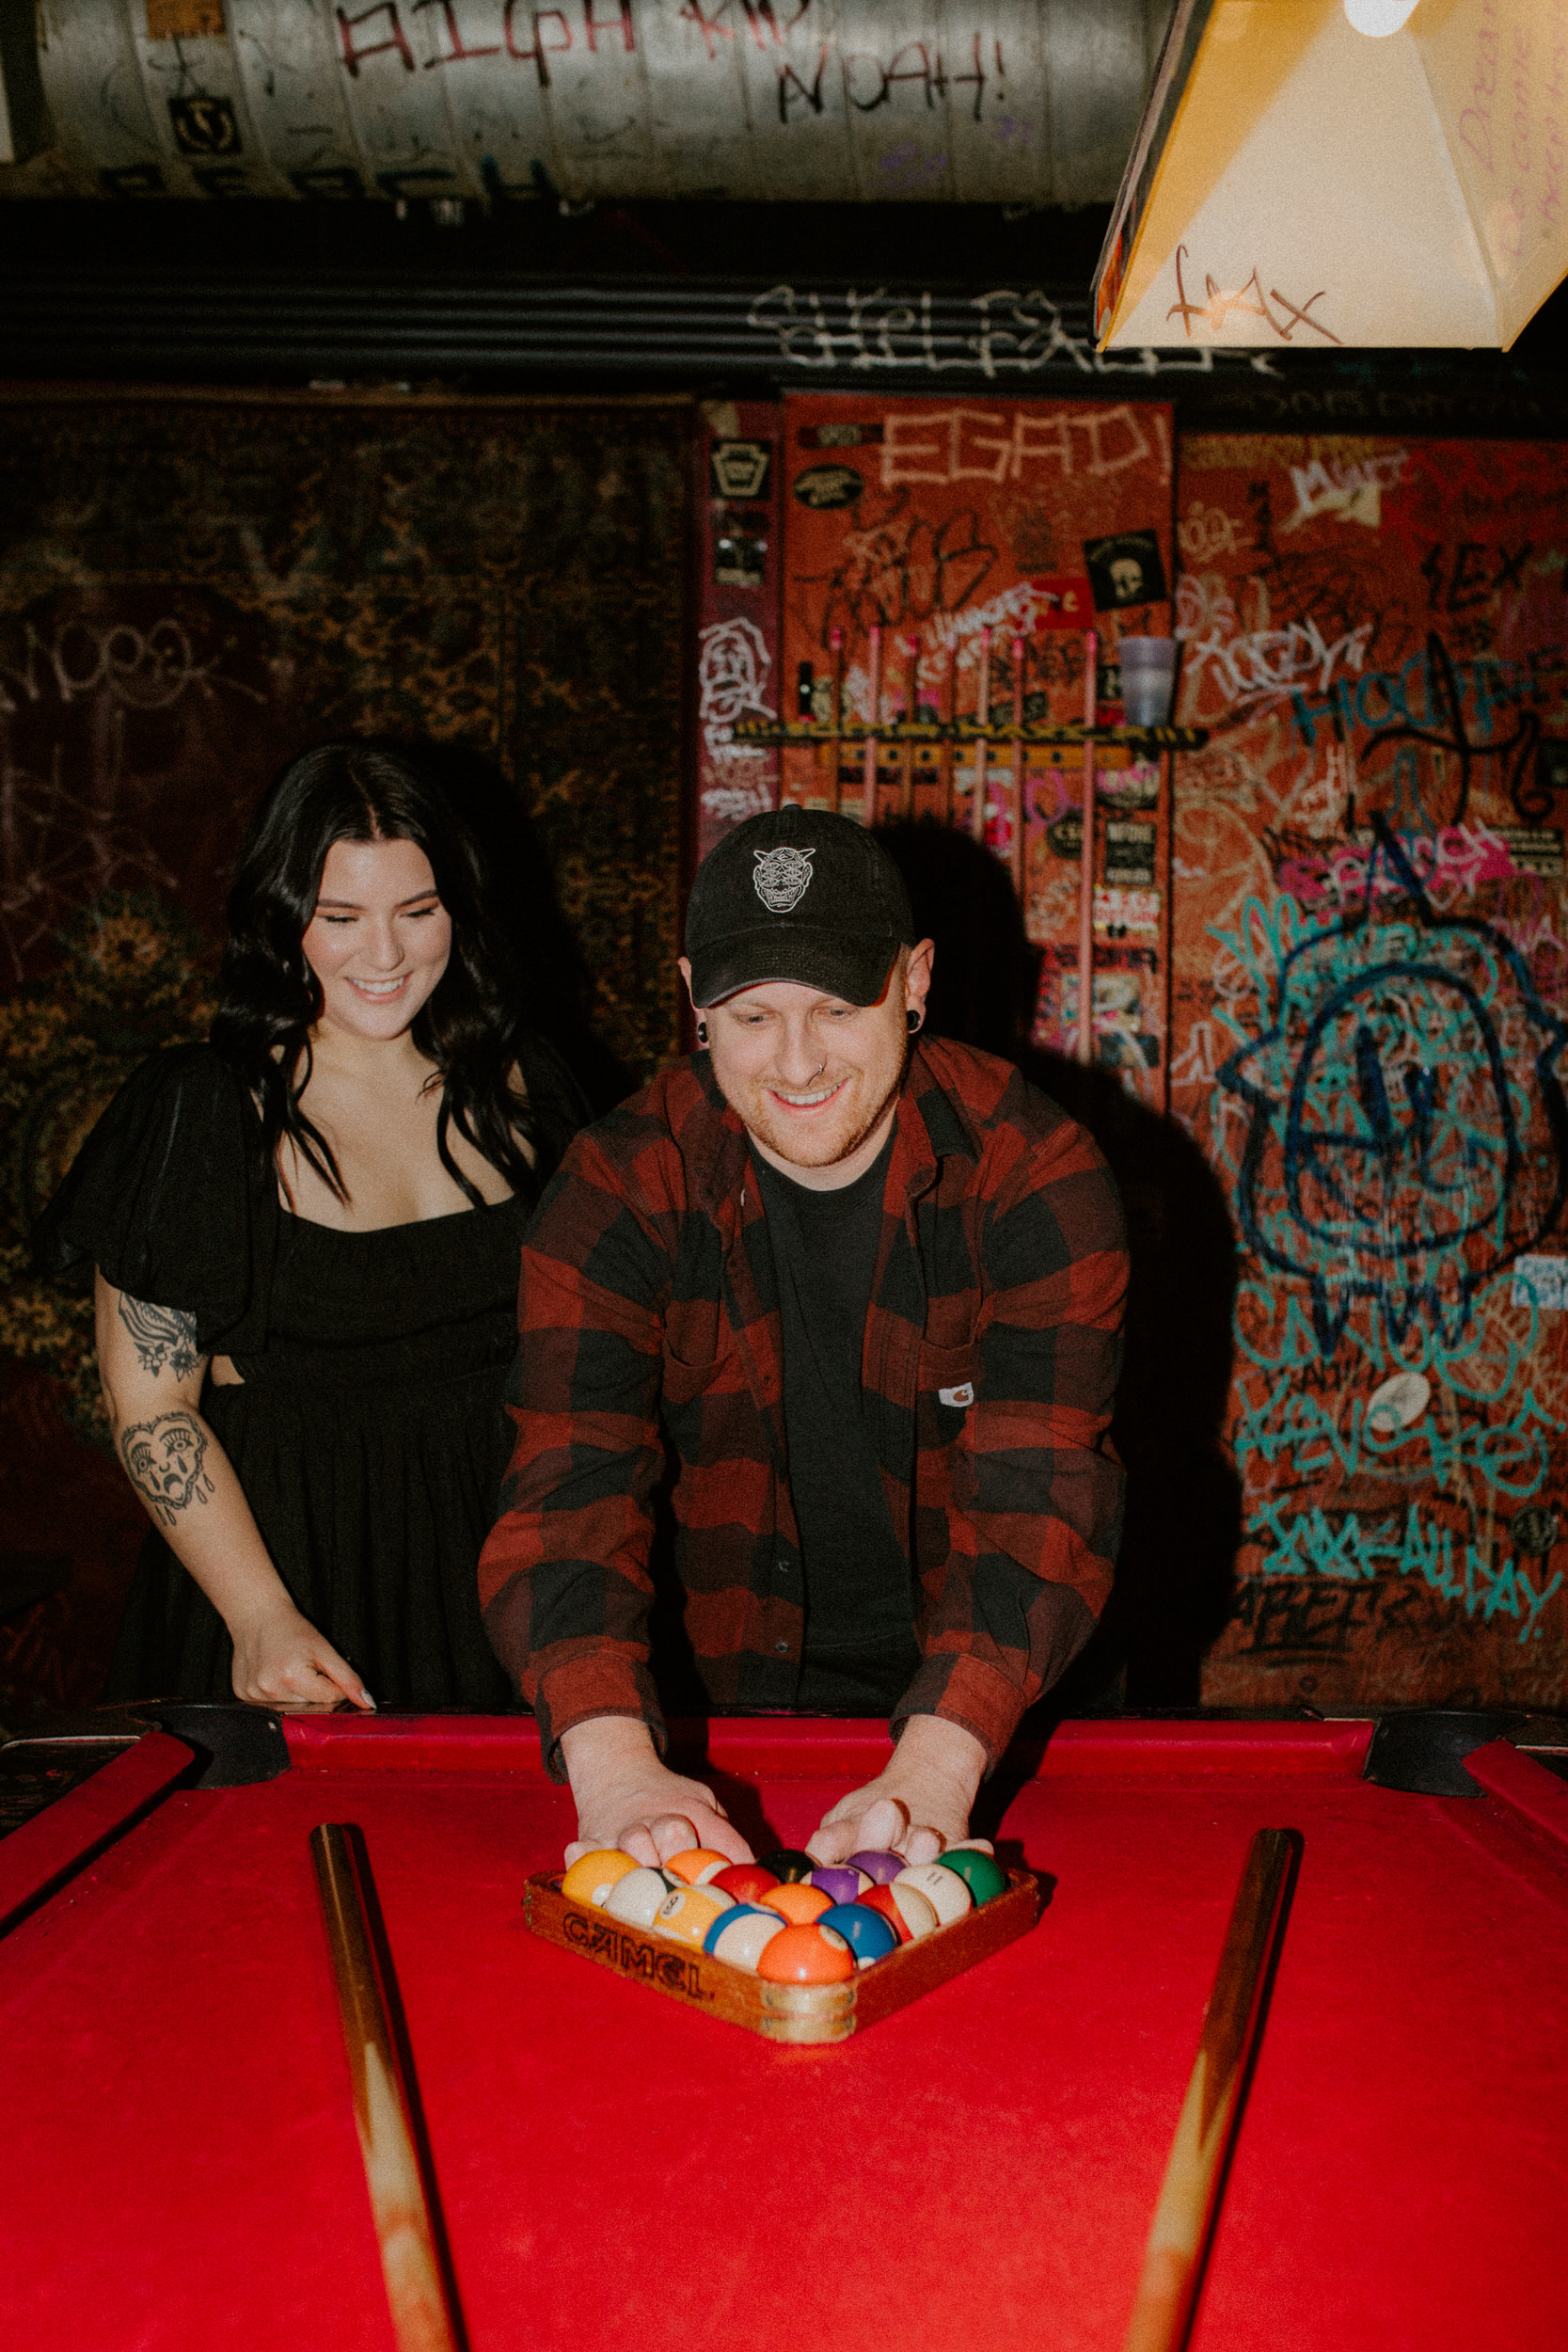 Pool table engagement photos